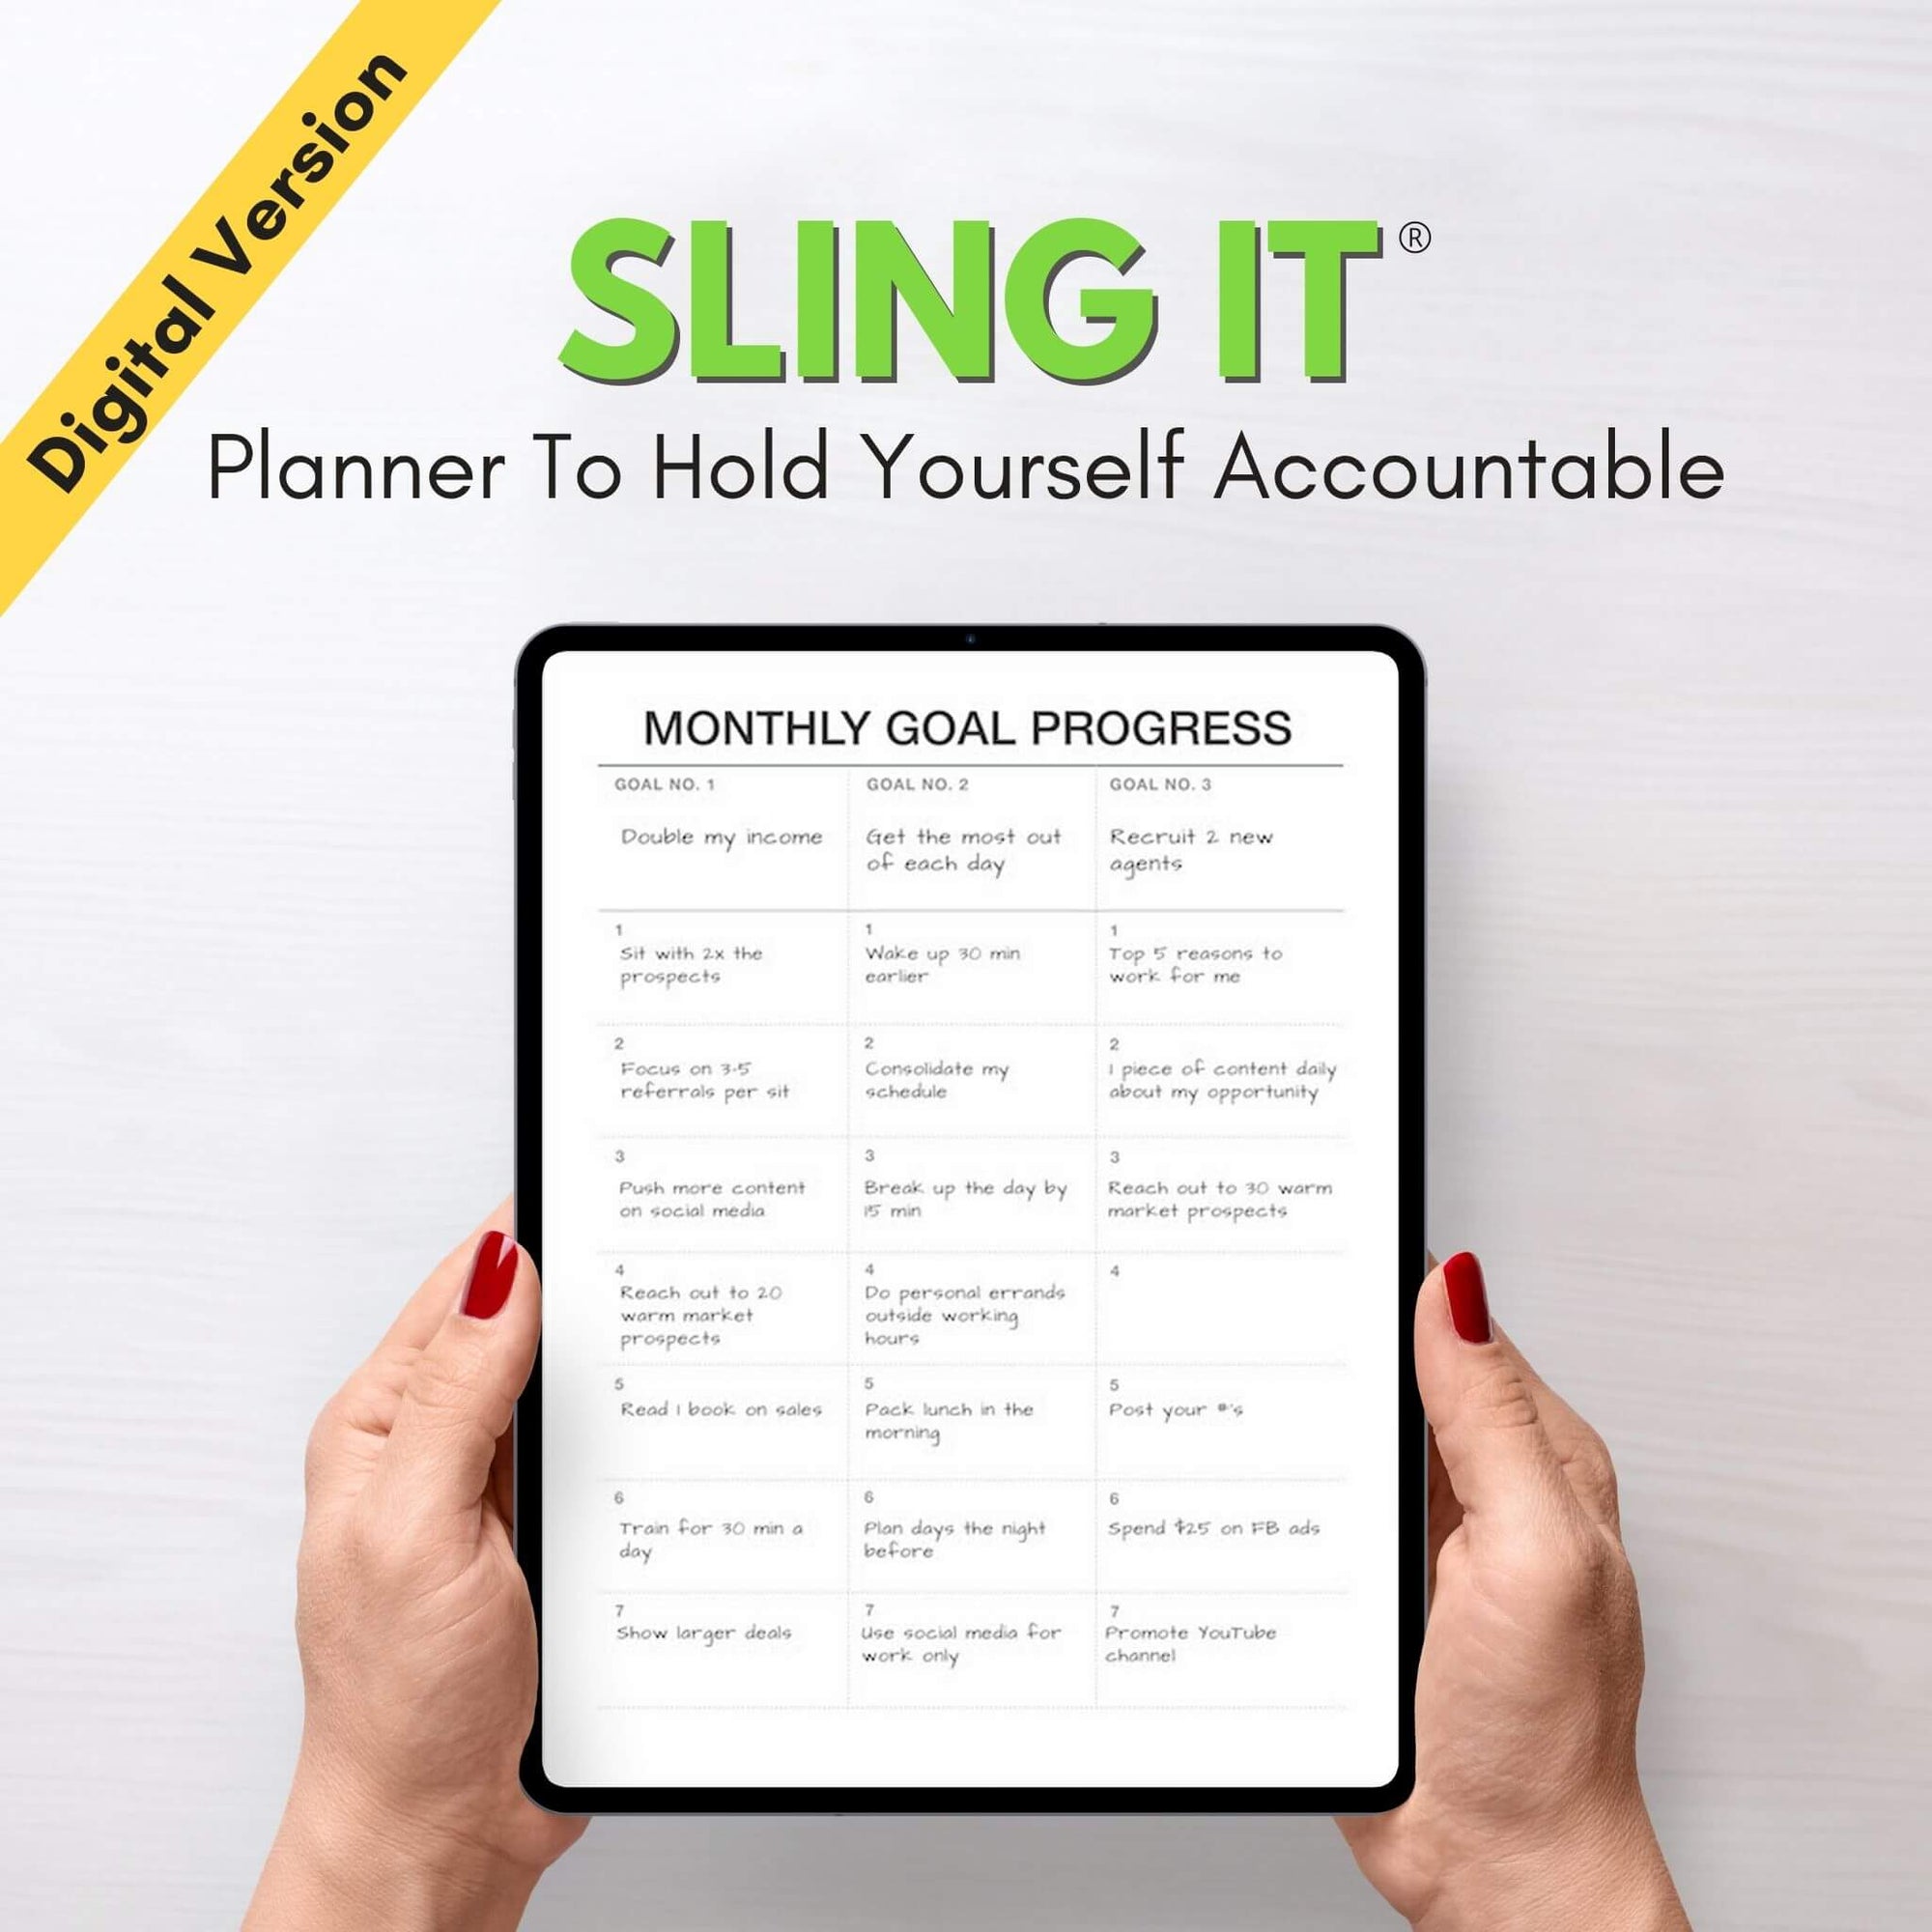 (Digital) Sling It® - Planner To Hold Yourself Accountable